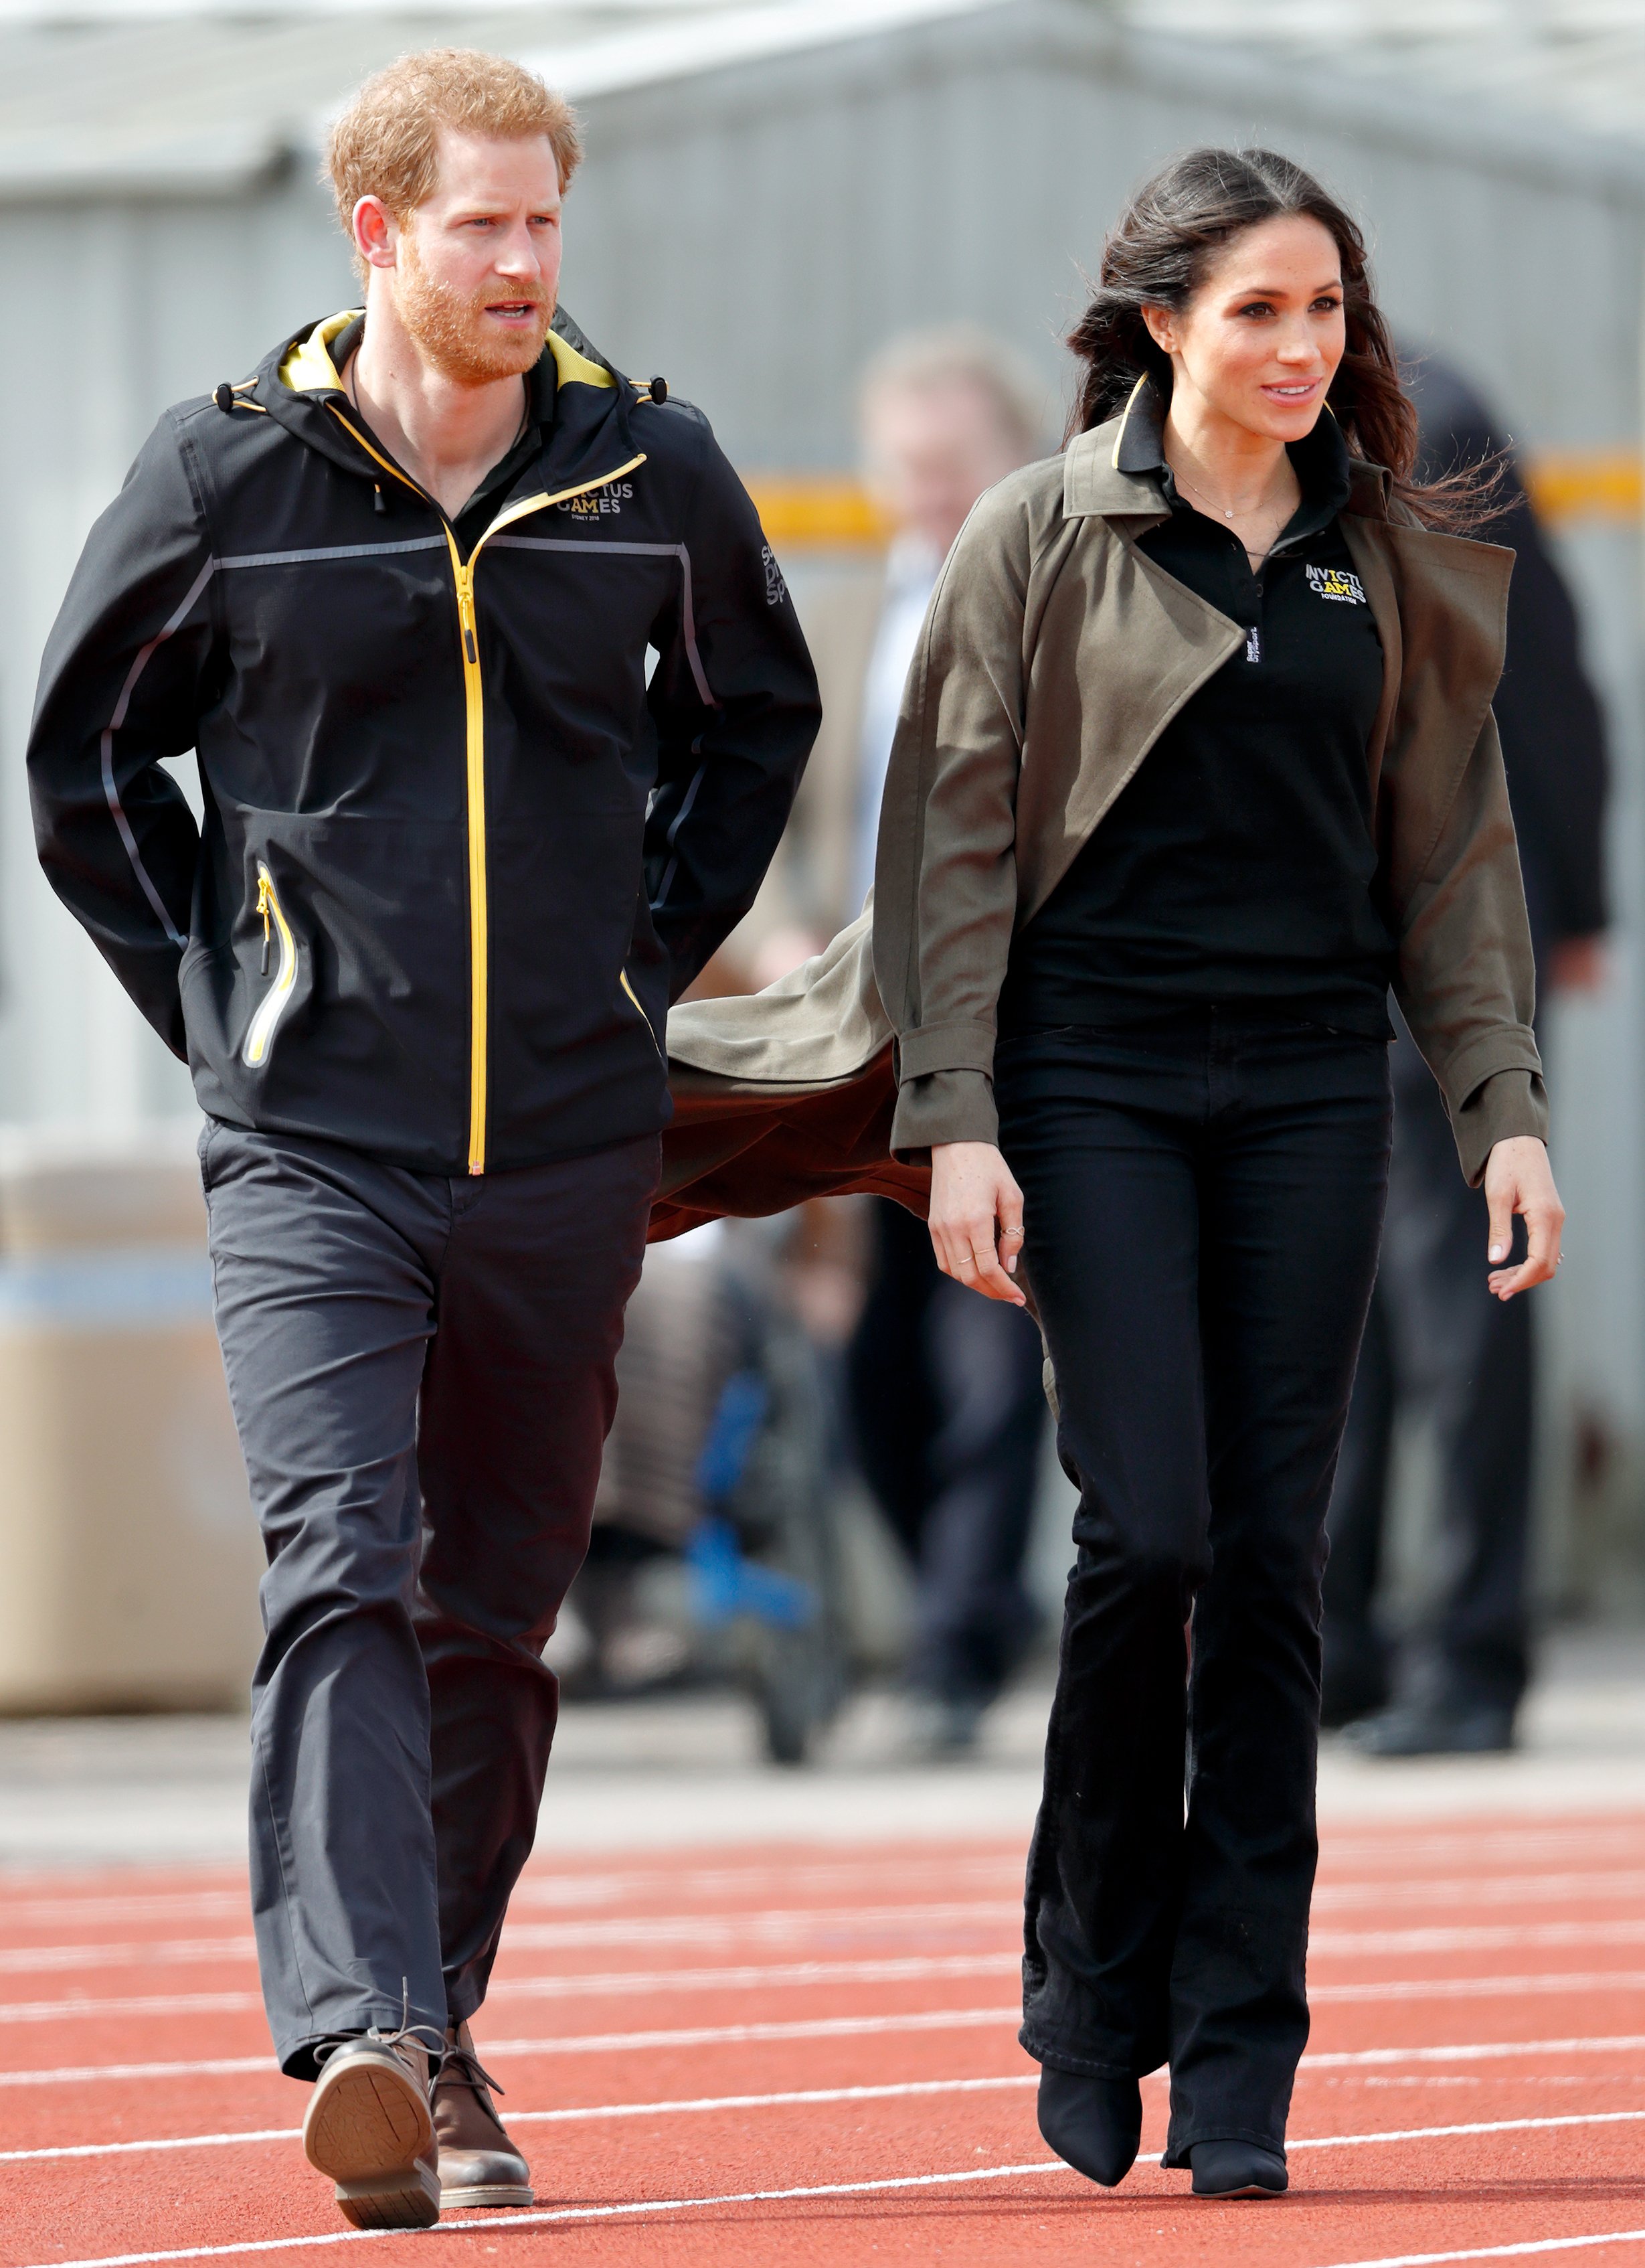  Prince Harry and Meghan Markle attend the UK Team Trials for the Invictus Games Sydney 2018 at the University of Bath on April 6, 2018 in Bath, England | Source: Getty Images